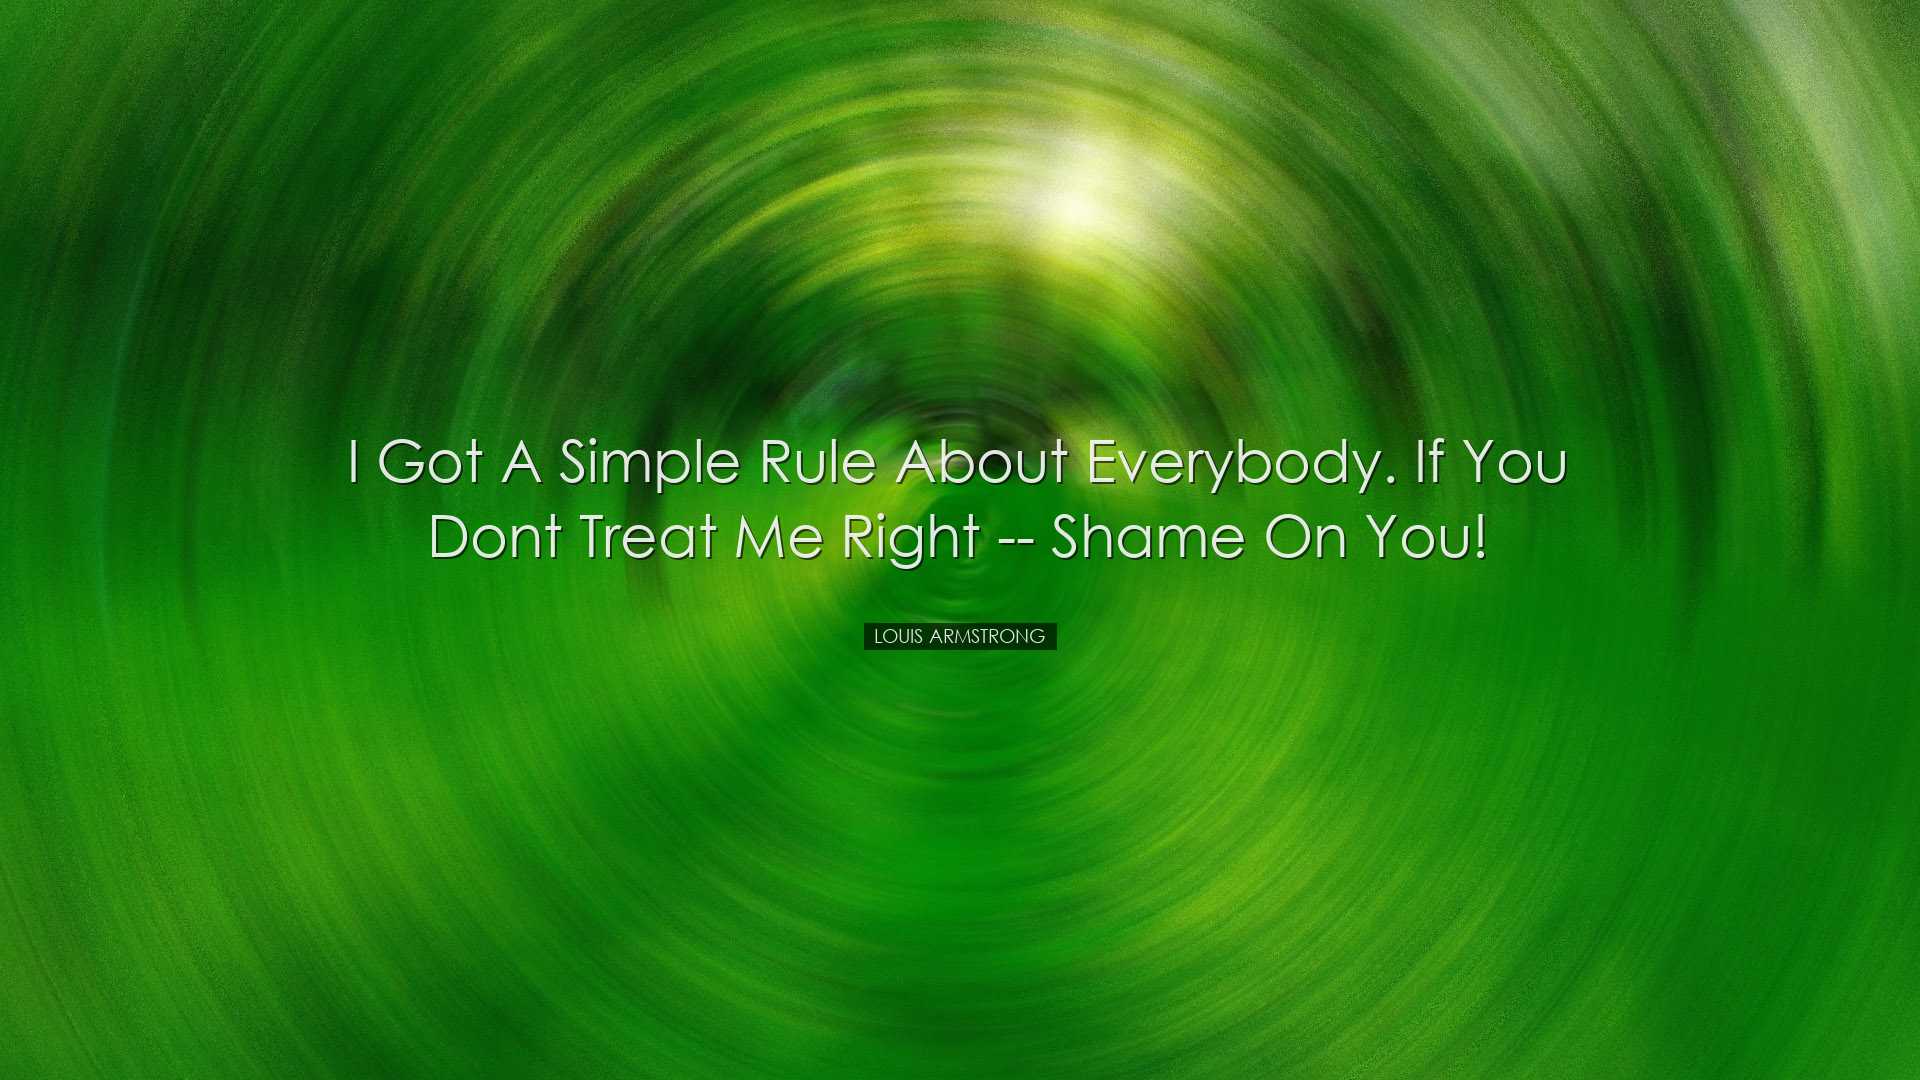 I got a simple rule about everybody. If you dont treat me right --